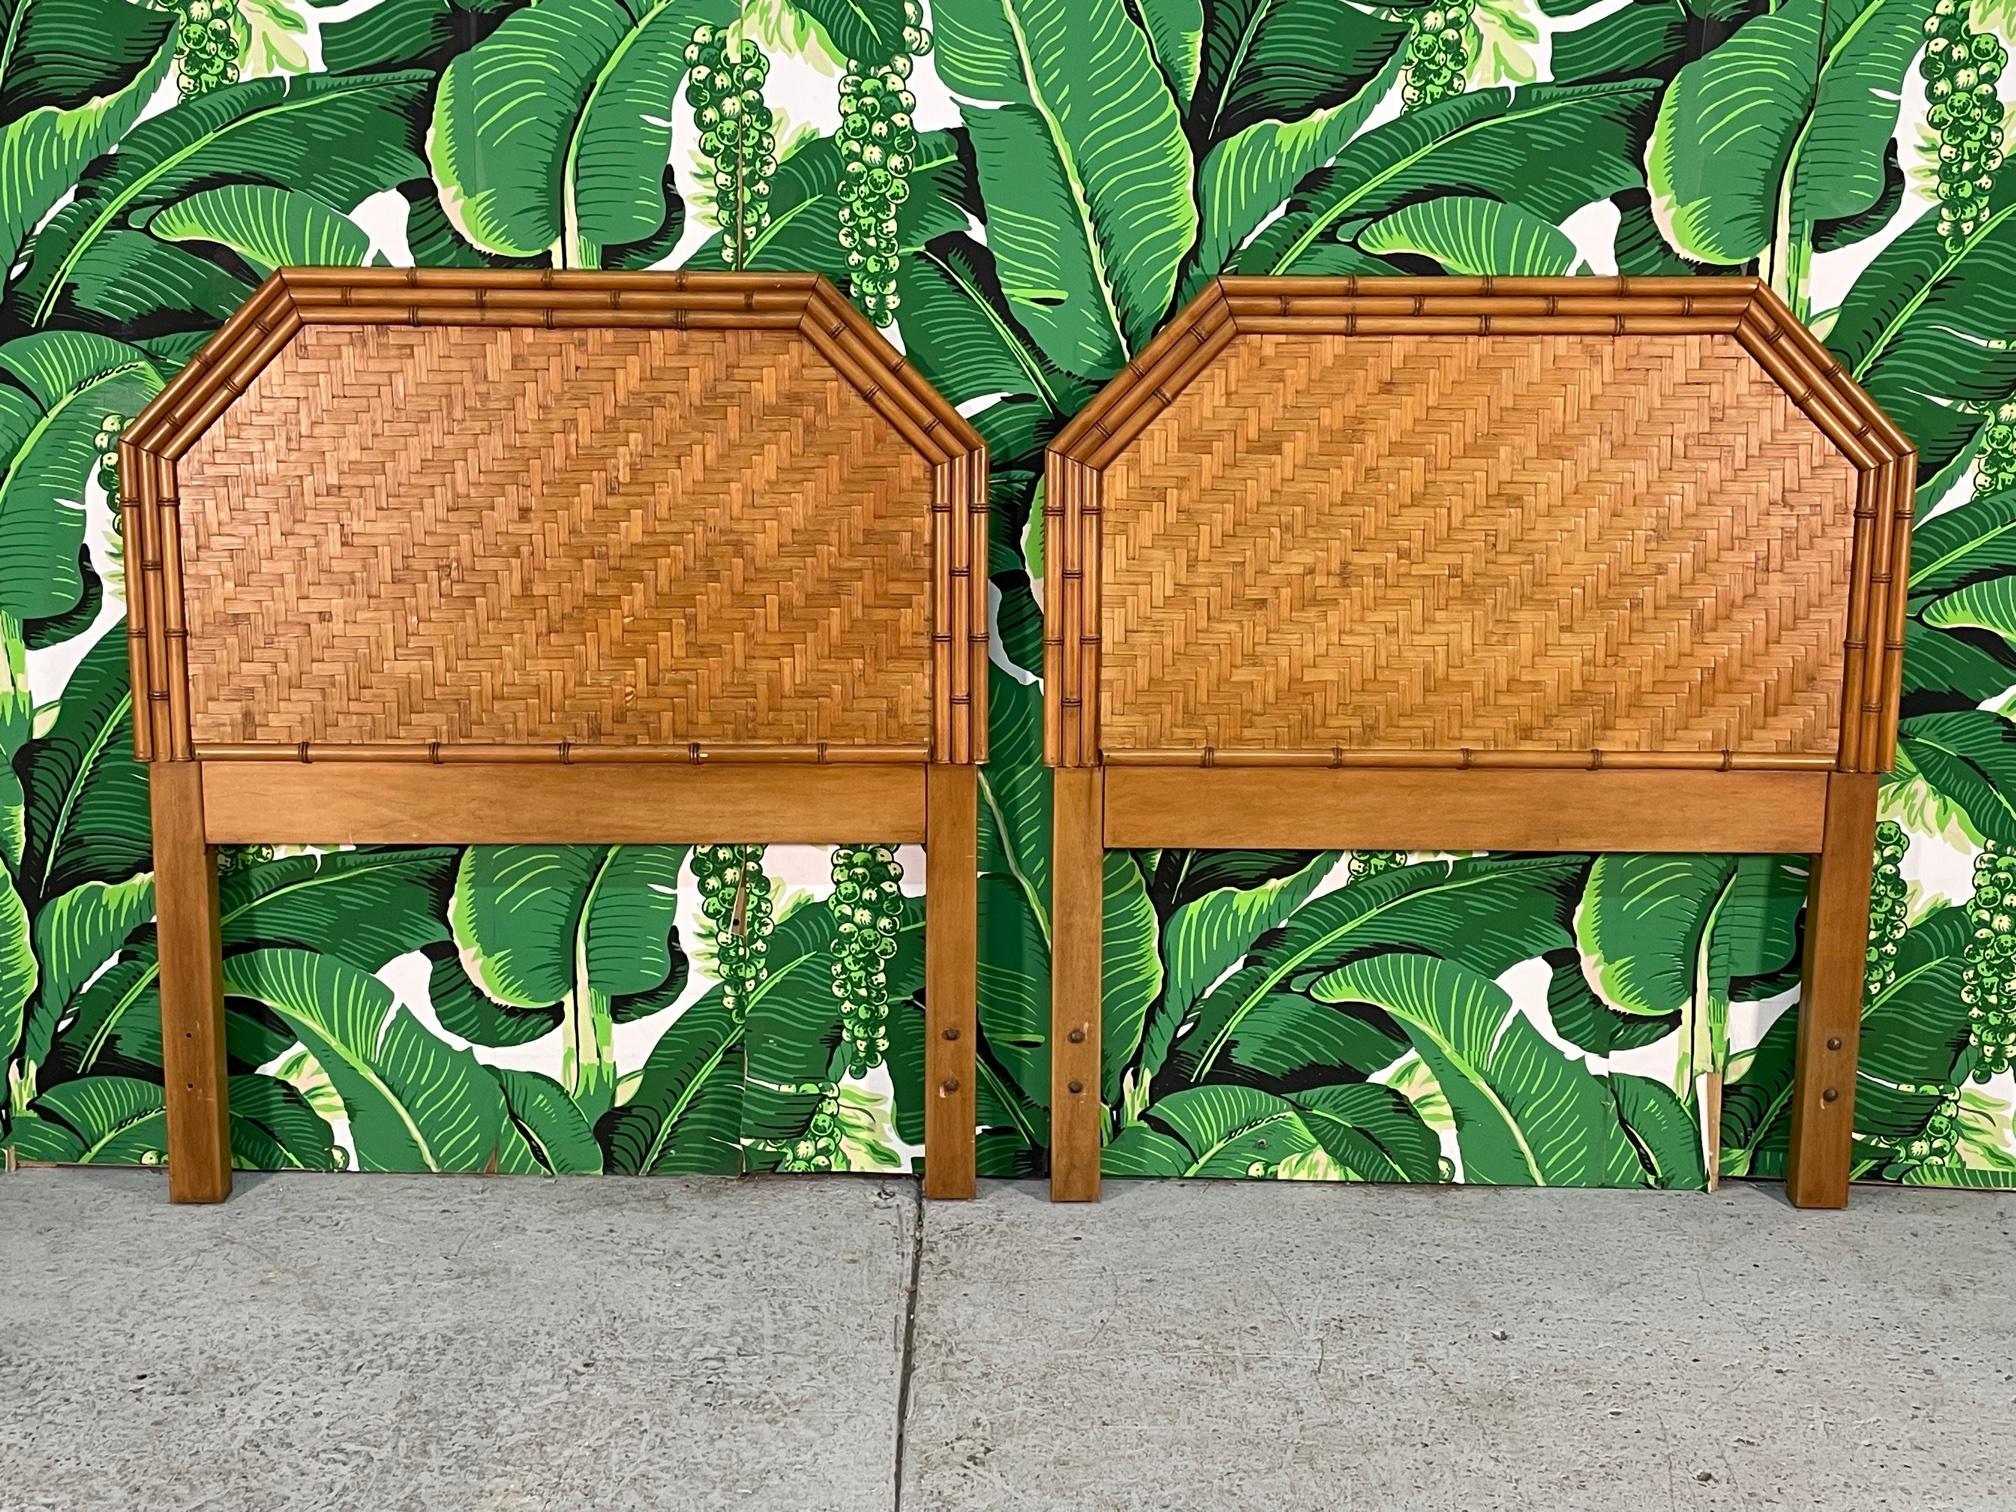 Vintage pair of twin headboards feature faux bamboo detailing and a complete veneer of woven rattan basket weave in a herringbone pattern. The unique rattan veneer gives a look of parquet. Reminiscent of designs by Bielecky Brothers. Warm, rich tone